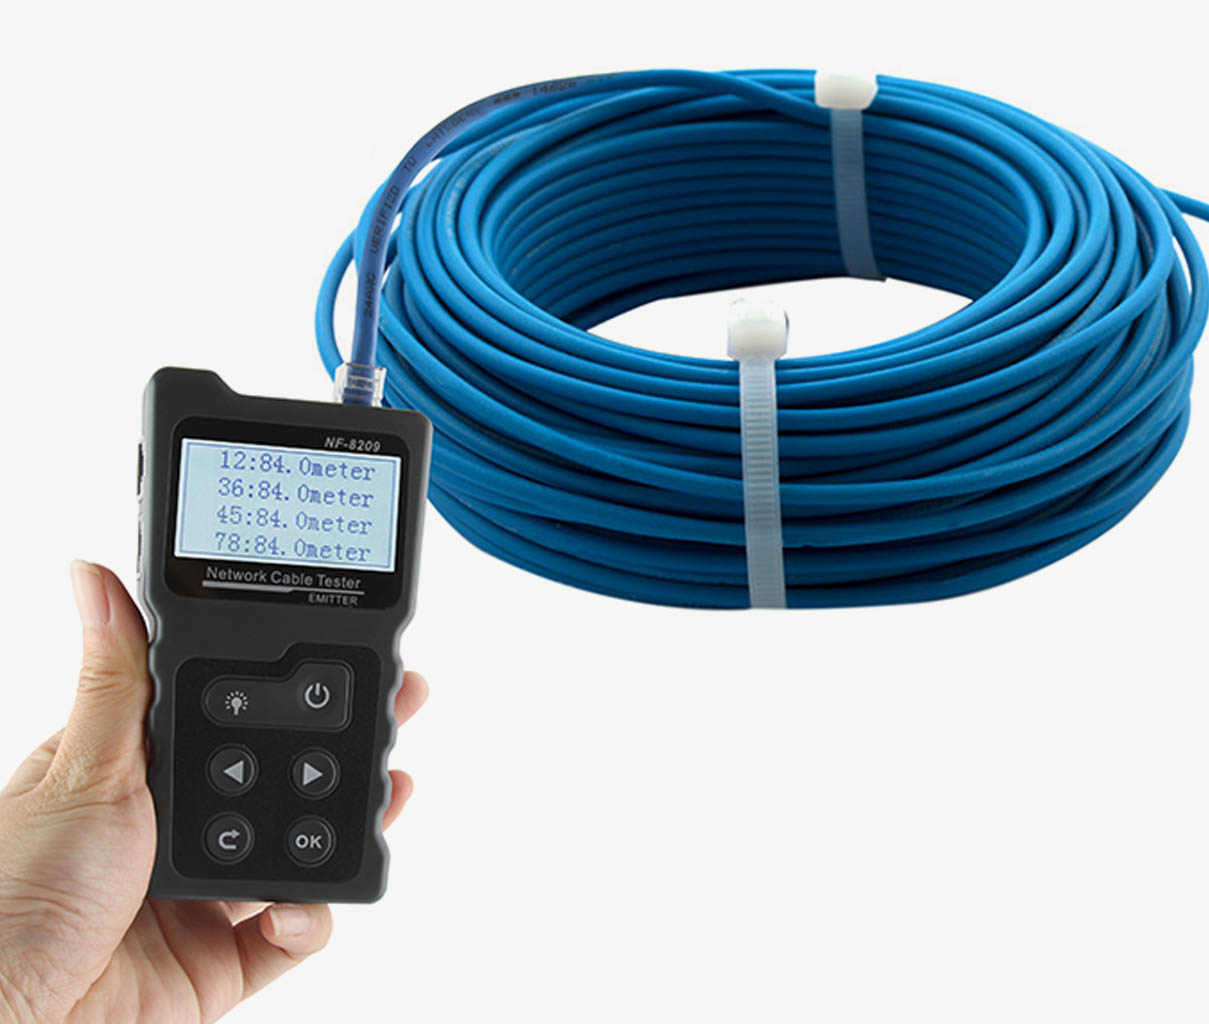 Toner and probe 3 cable tracking modes built-in NF-8209 with cable continuity testing 9